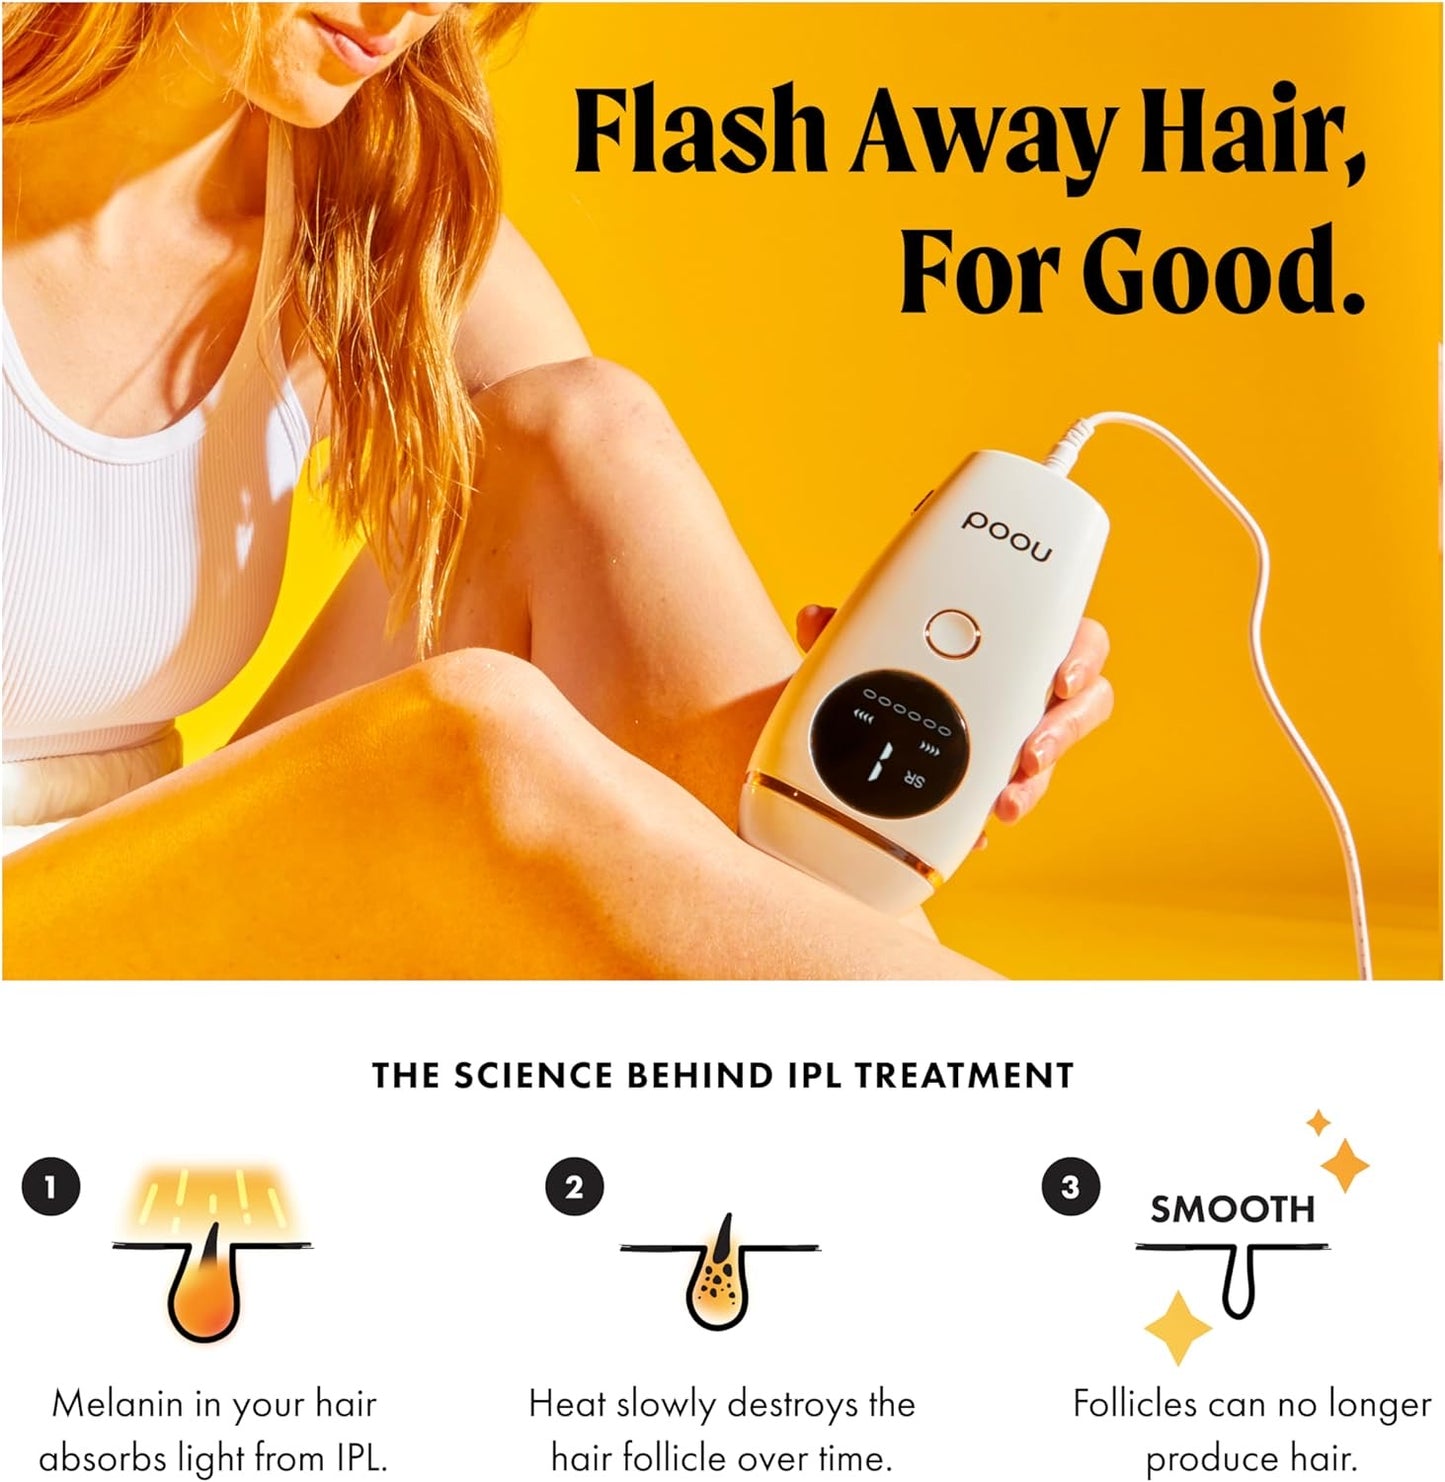 Flasher 2.0 by Nood, IPL Laser Hair Removal Device for Men and Women, Pain-free and Permanent Results, Safe for Whole Body Treatment